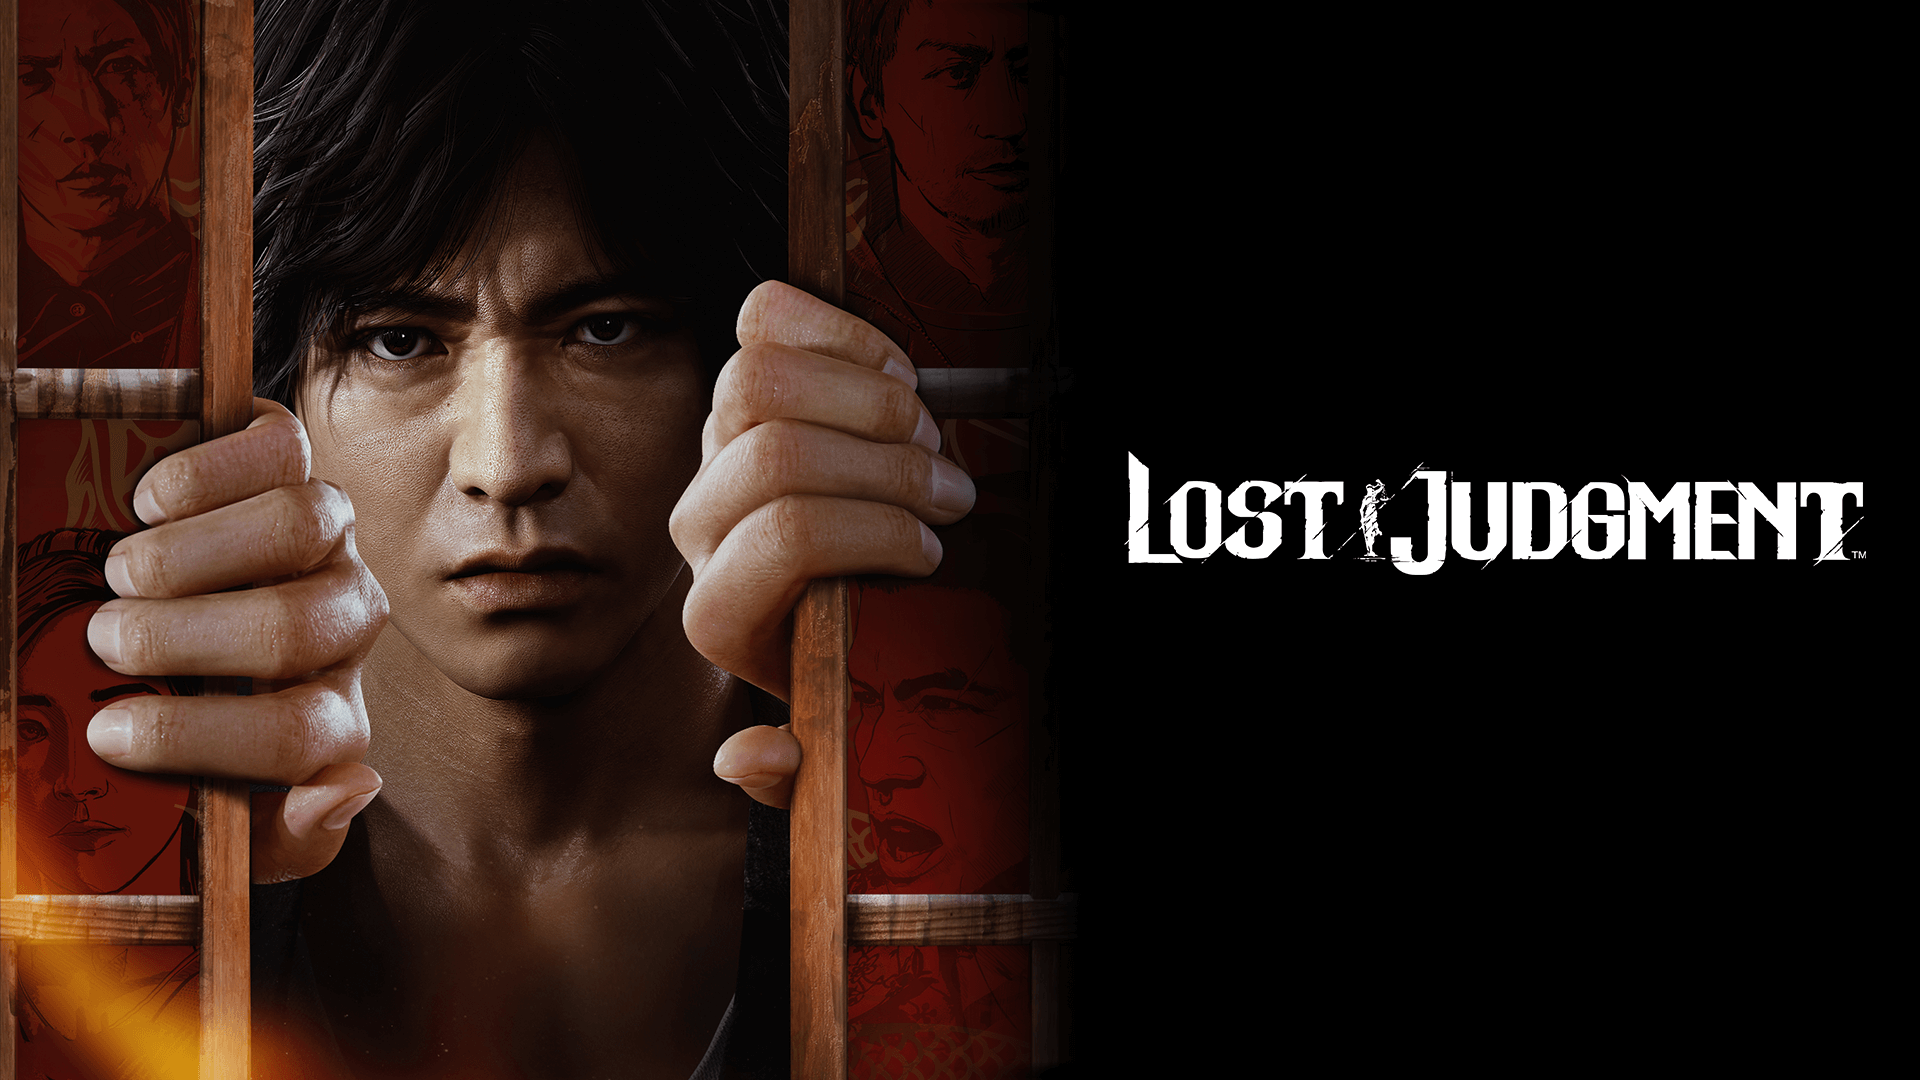 lost judgment ps5